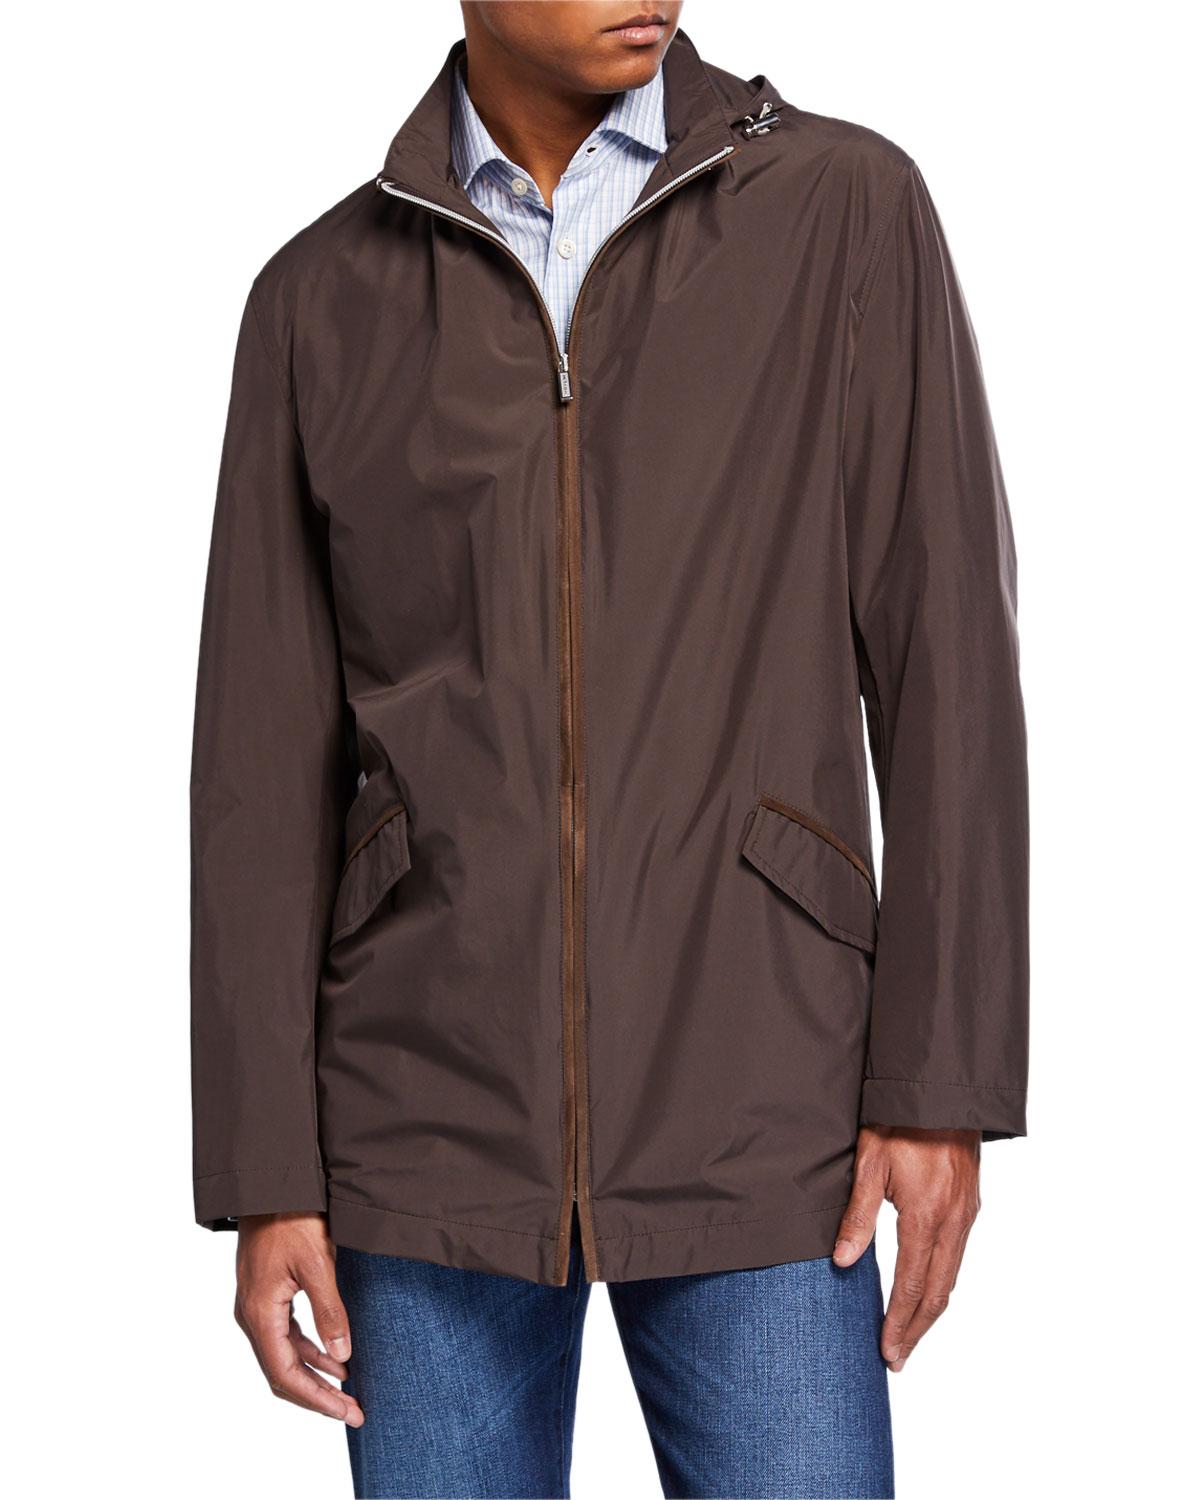 Kiton Synthetic Men's Packable Rain Coat With Hood in Brown for Men - Lyst